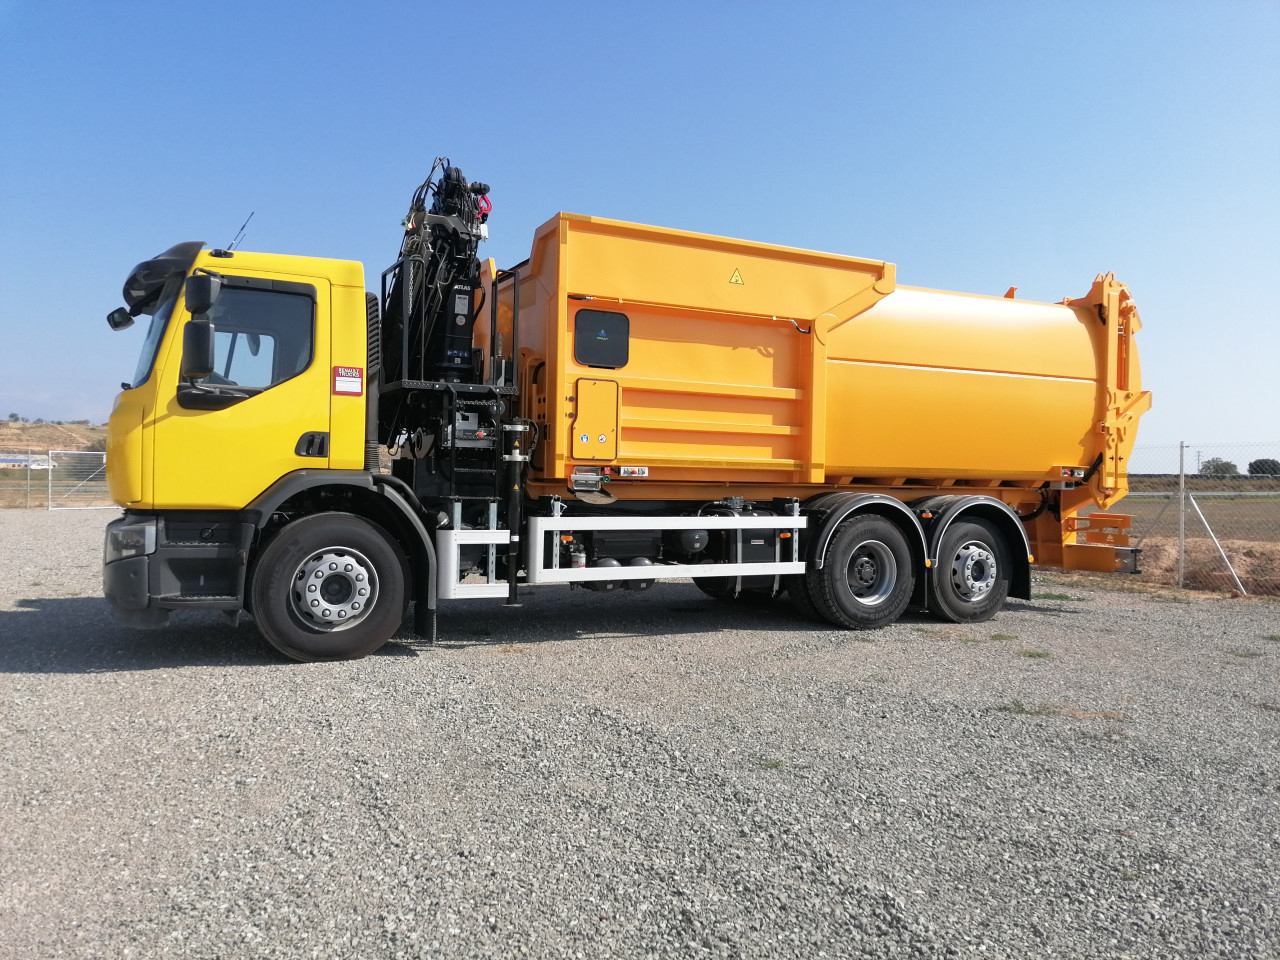 Burgos' region bought eight new top loading compaction equipment, suitable to deal with waste collection service